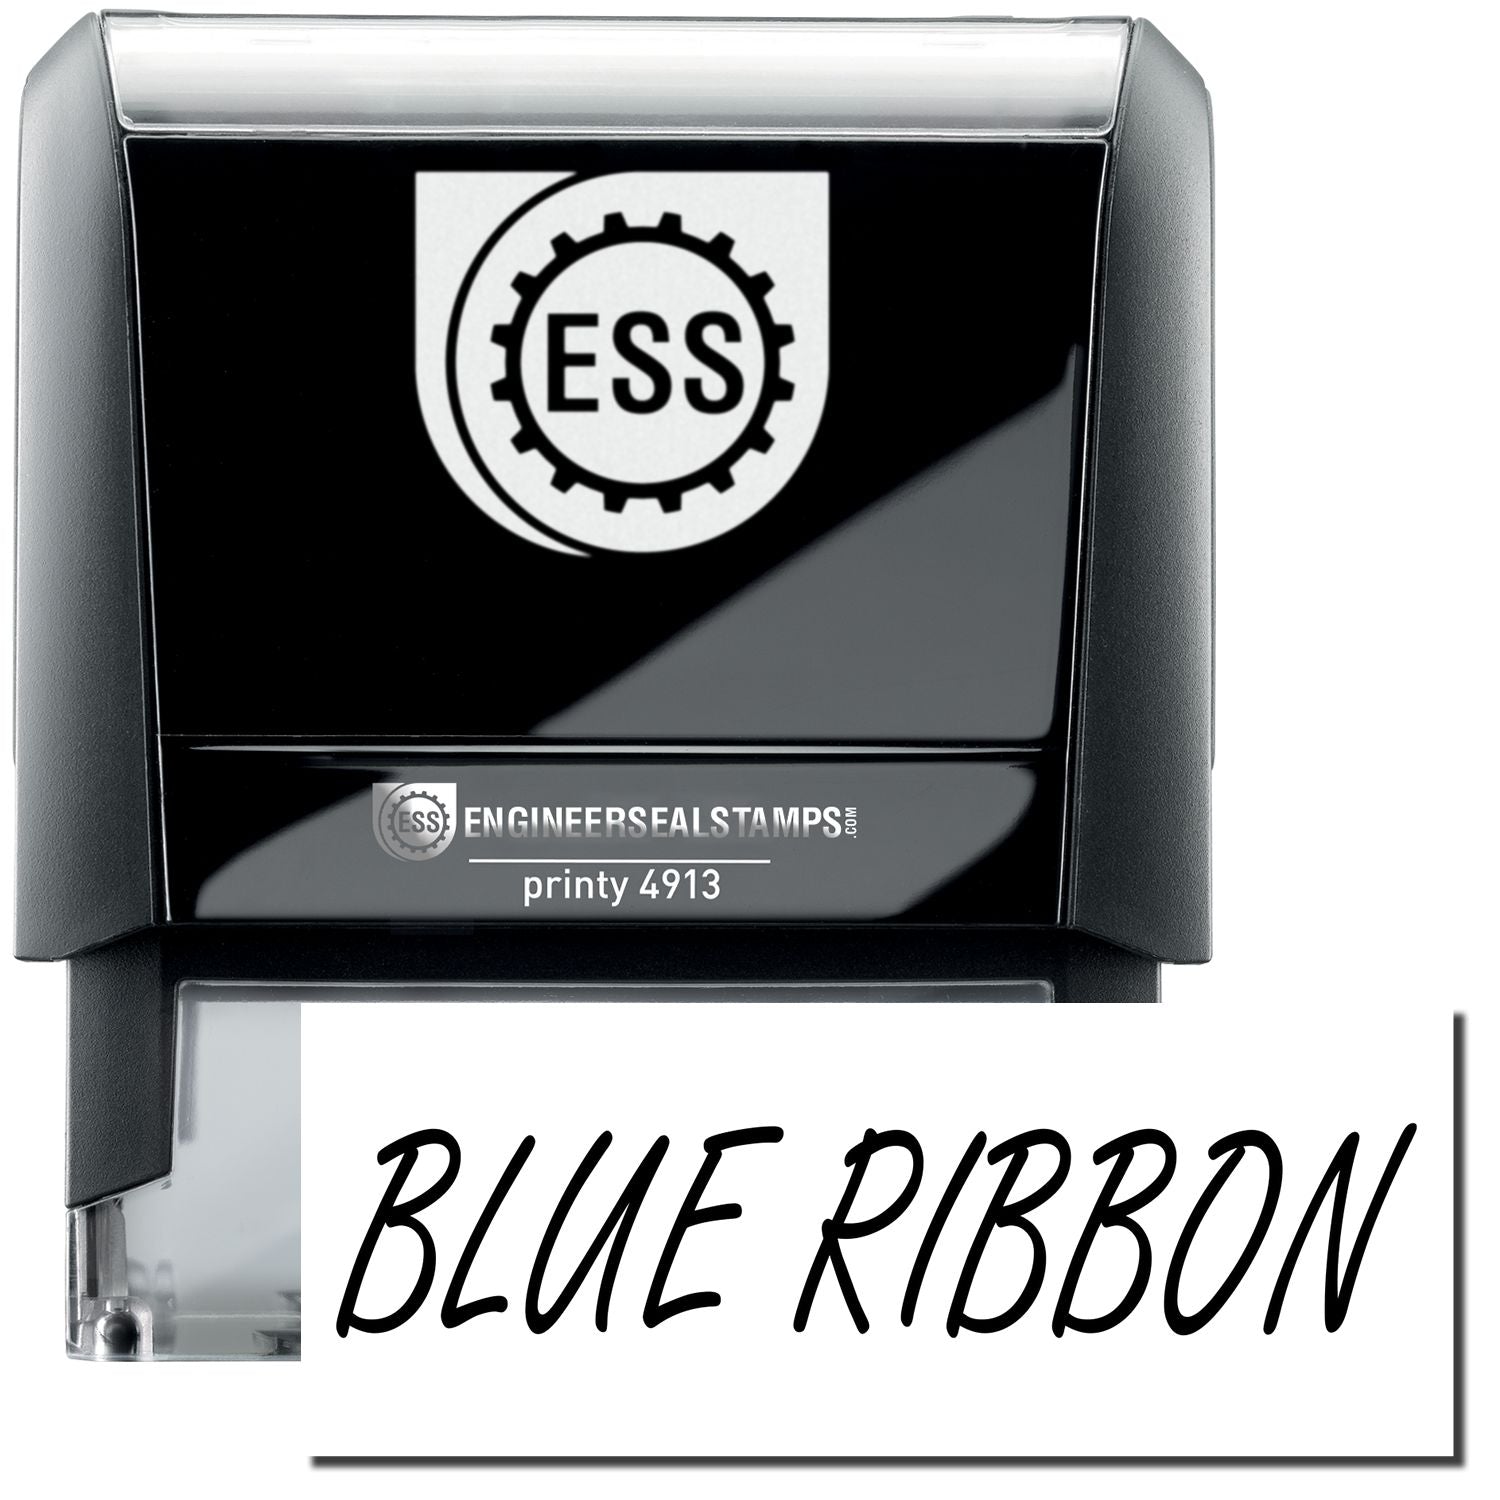 A self-inking stamp with a stamped image showing how the text "BLUE RIBBON" in an italic large bold font is displayed by it.